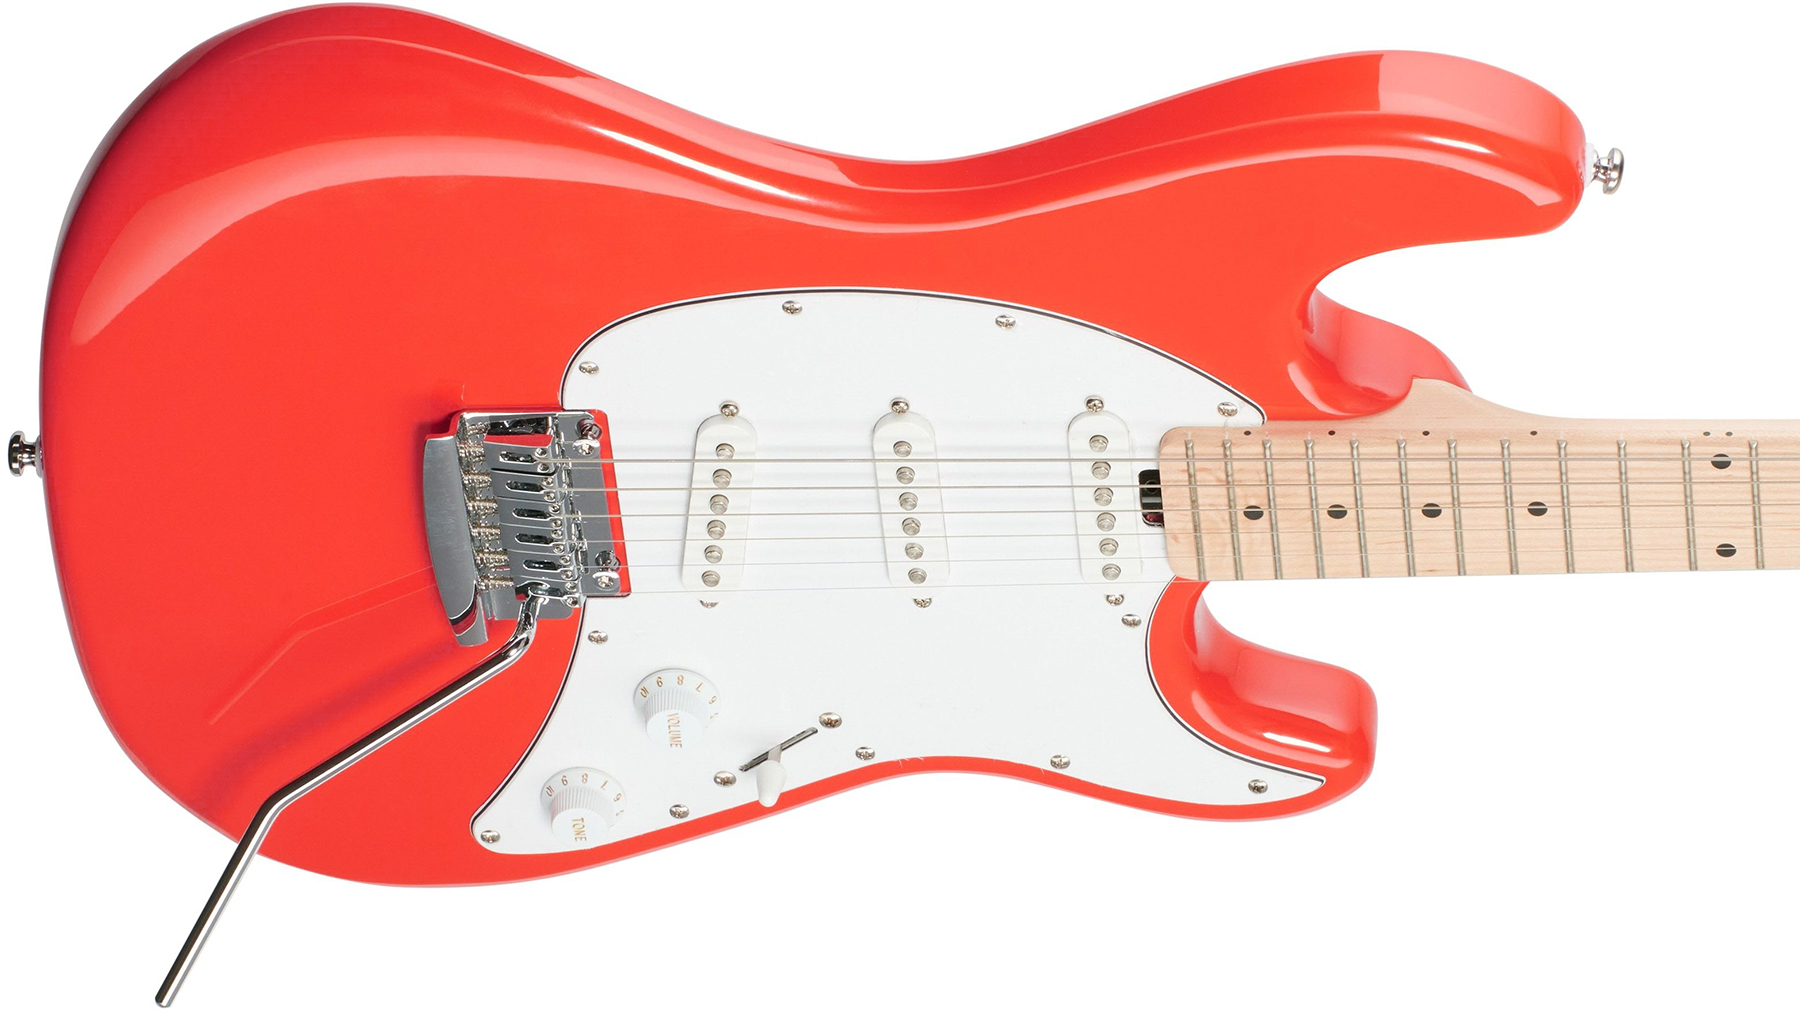 Sterling By Musicman Cutlass Ct30sss 3s Trem Mn - Fiesta Red - Guitare Électrique Forme Str - Variation 2